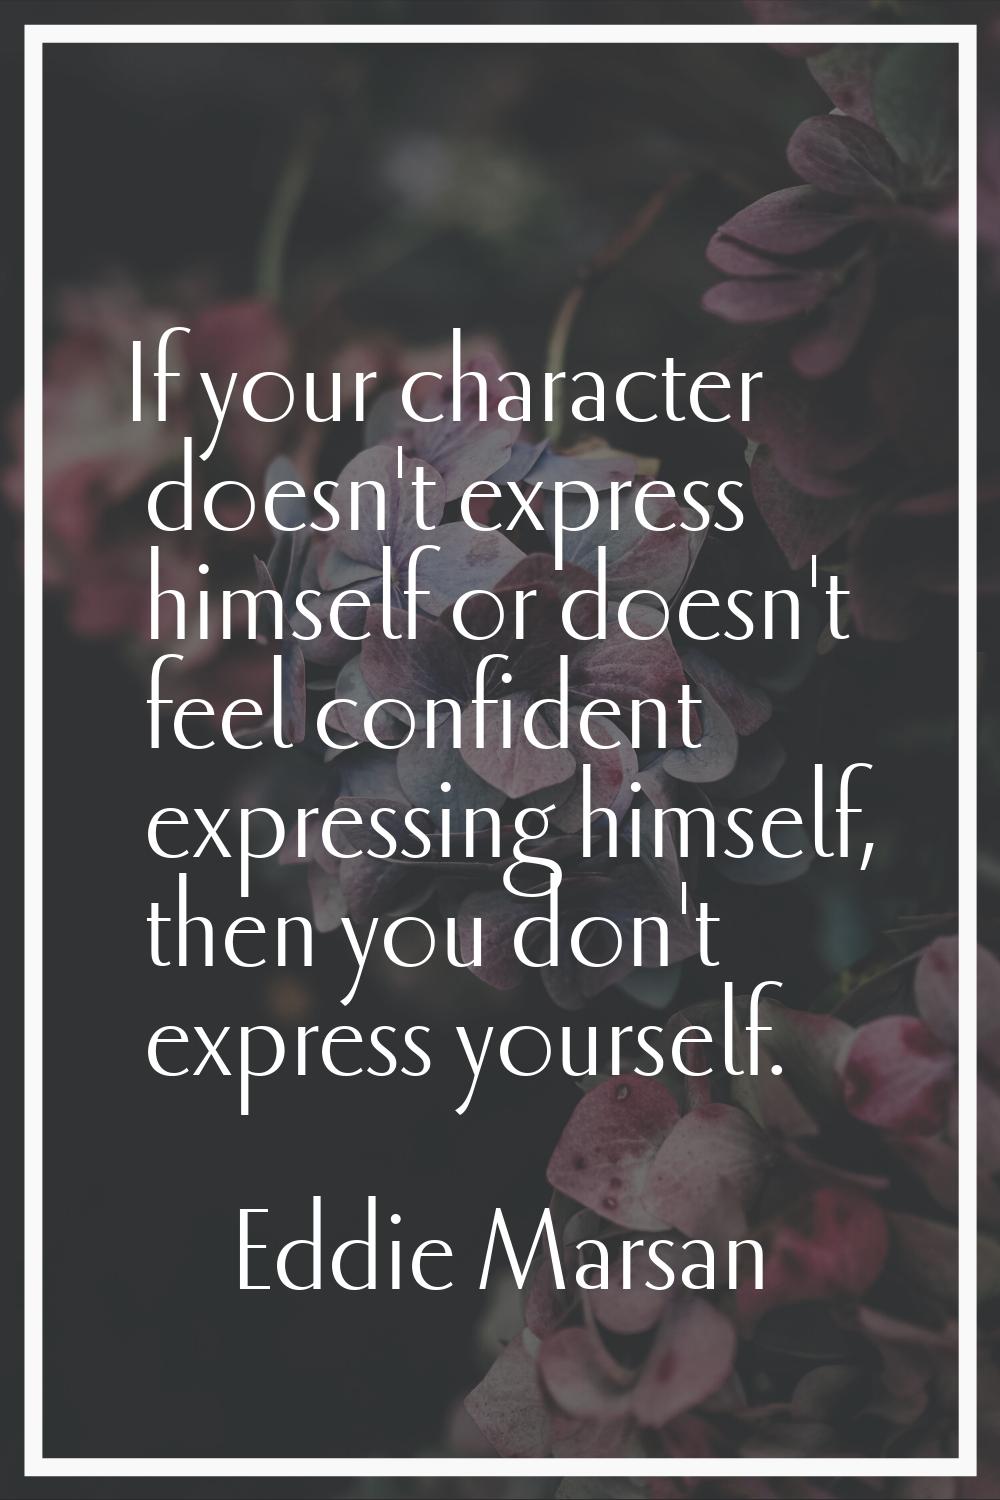 If your character doesn't express himself or doesn't feel confident expressing himself, then you do